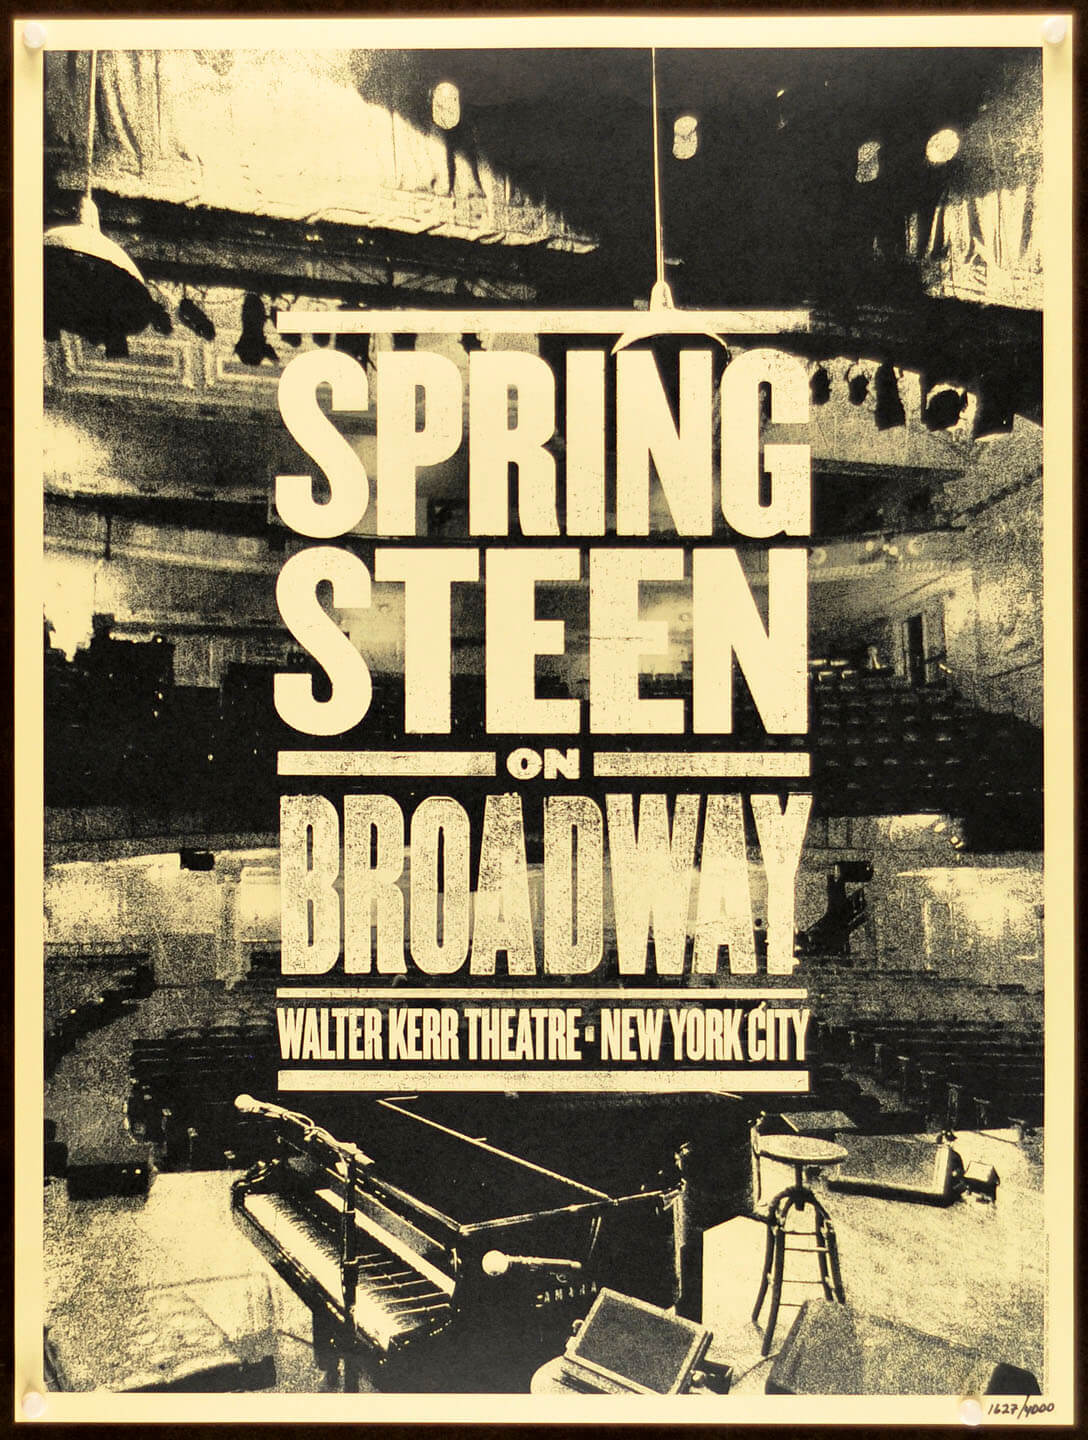 Bruce Springsteen on Broadway at the Walter Kerr Theatre